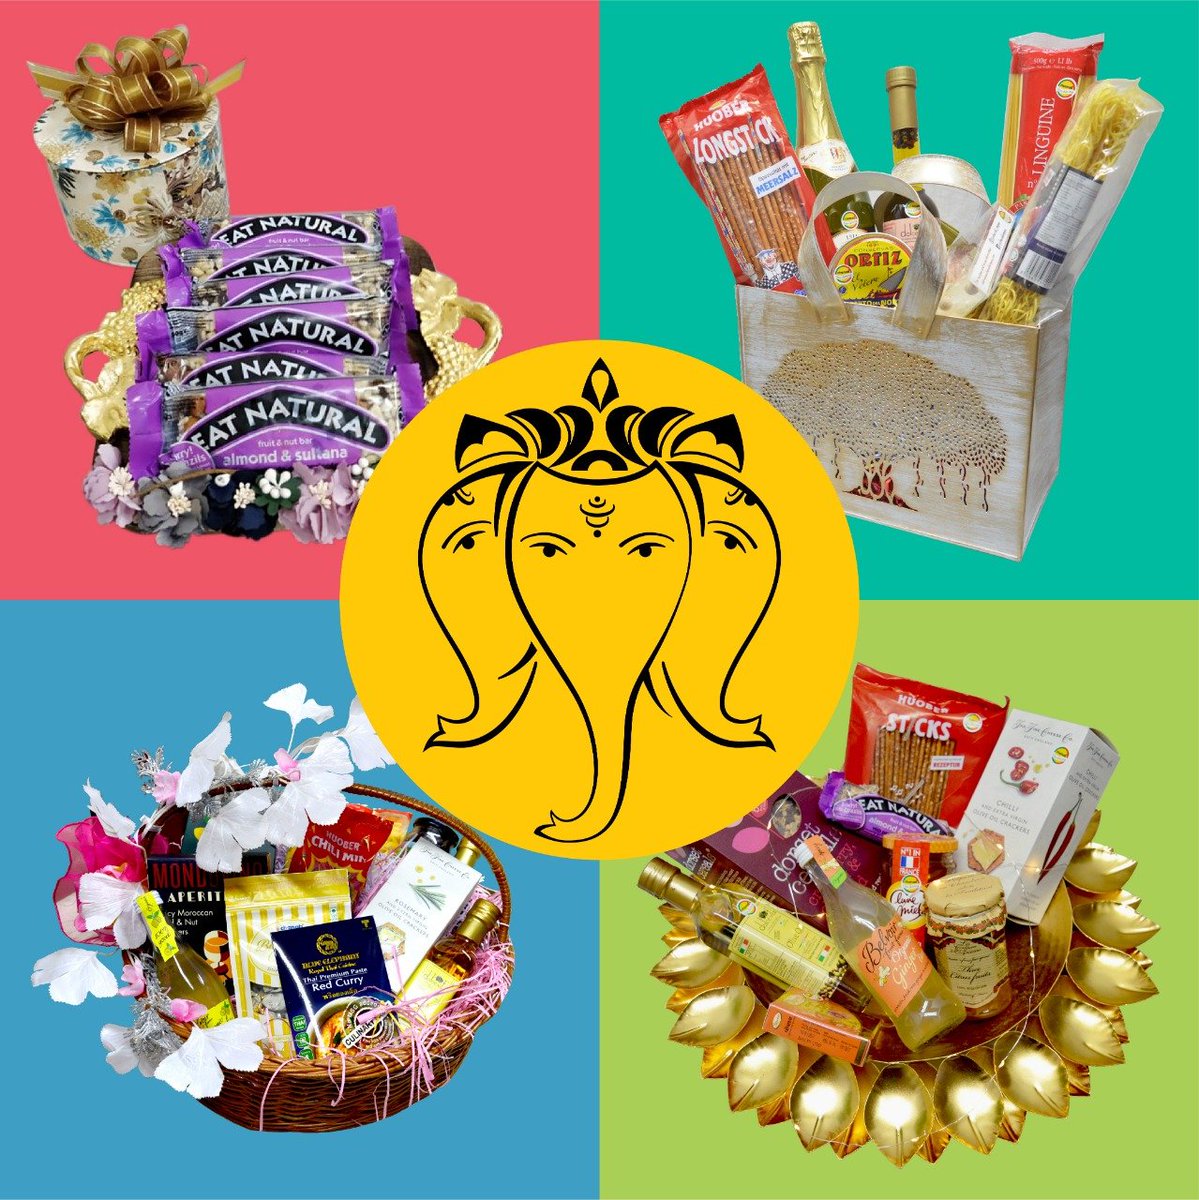 On the auspicious occasion of Ganesh Chaturthi let's welcome Lord Ganesha with healthy and delicious hampers. Visiting friends and family to seek blessings look no further than customized hampers from Chenab.

chenabimpex.com
#chenabimpex #happyganeshchaturthi #foodhamper